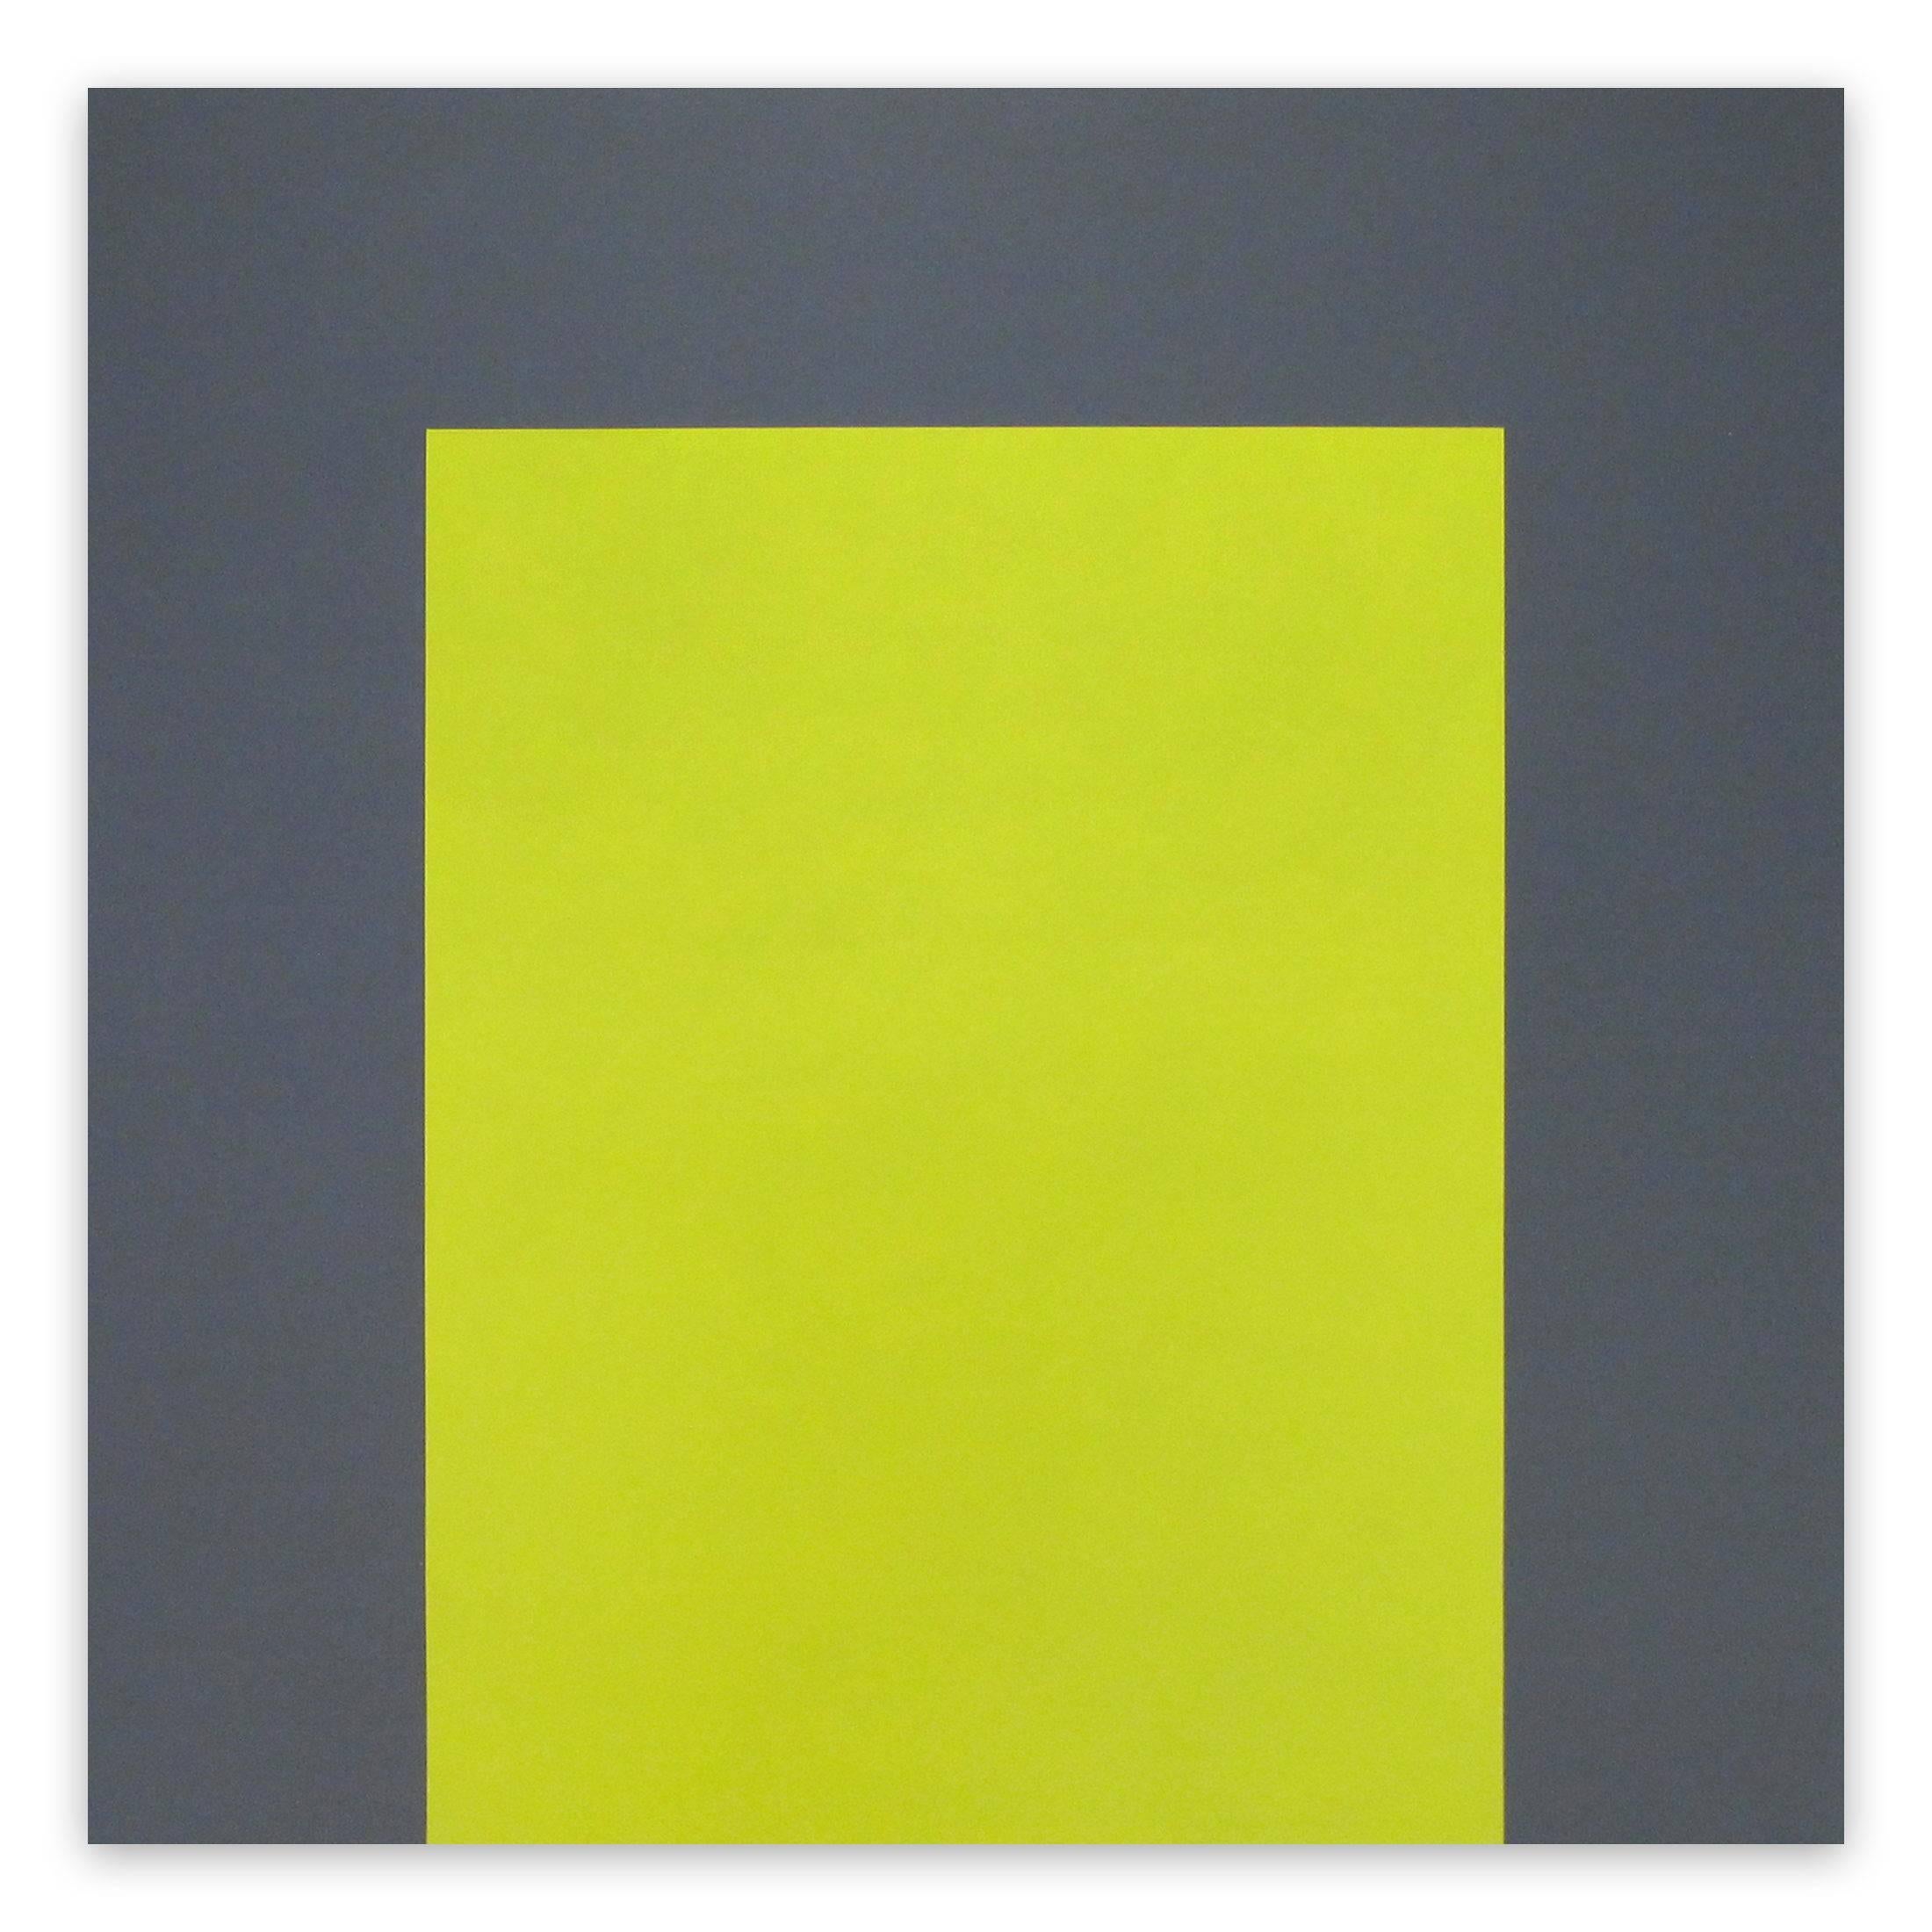 Untitled 1, 2014  (Abstract Painting)

Acrylic on MDF - Unframed

This work is one of six similar painted works, consisting of acrylic painted MDF of the same size.

Two colours are dividing the painting into two separate geometric forms.

The